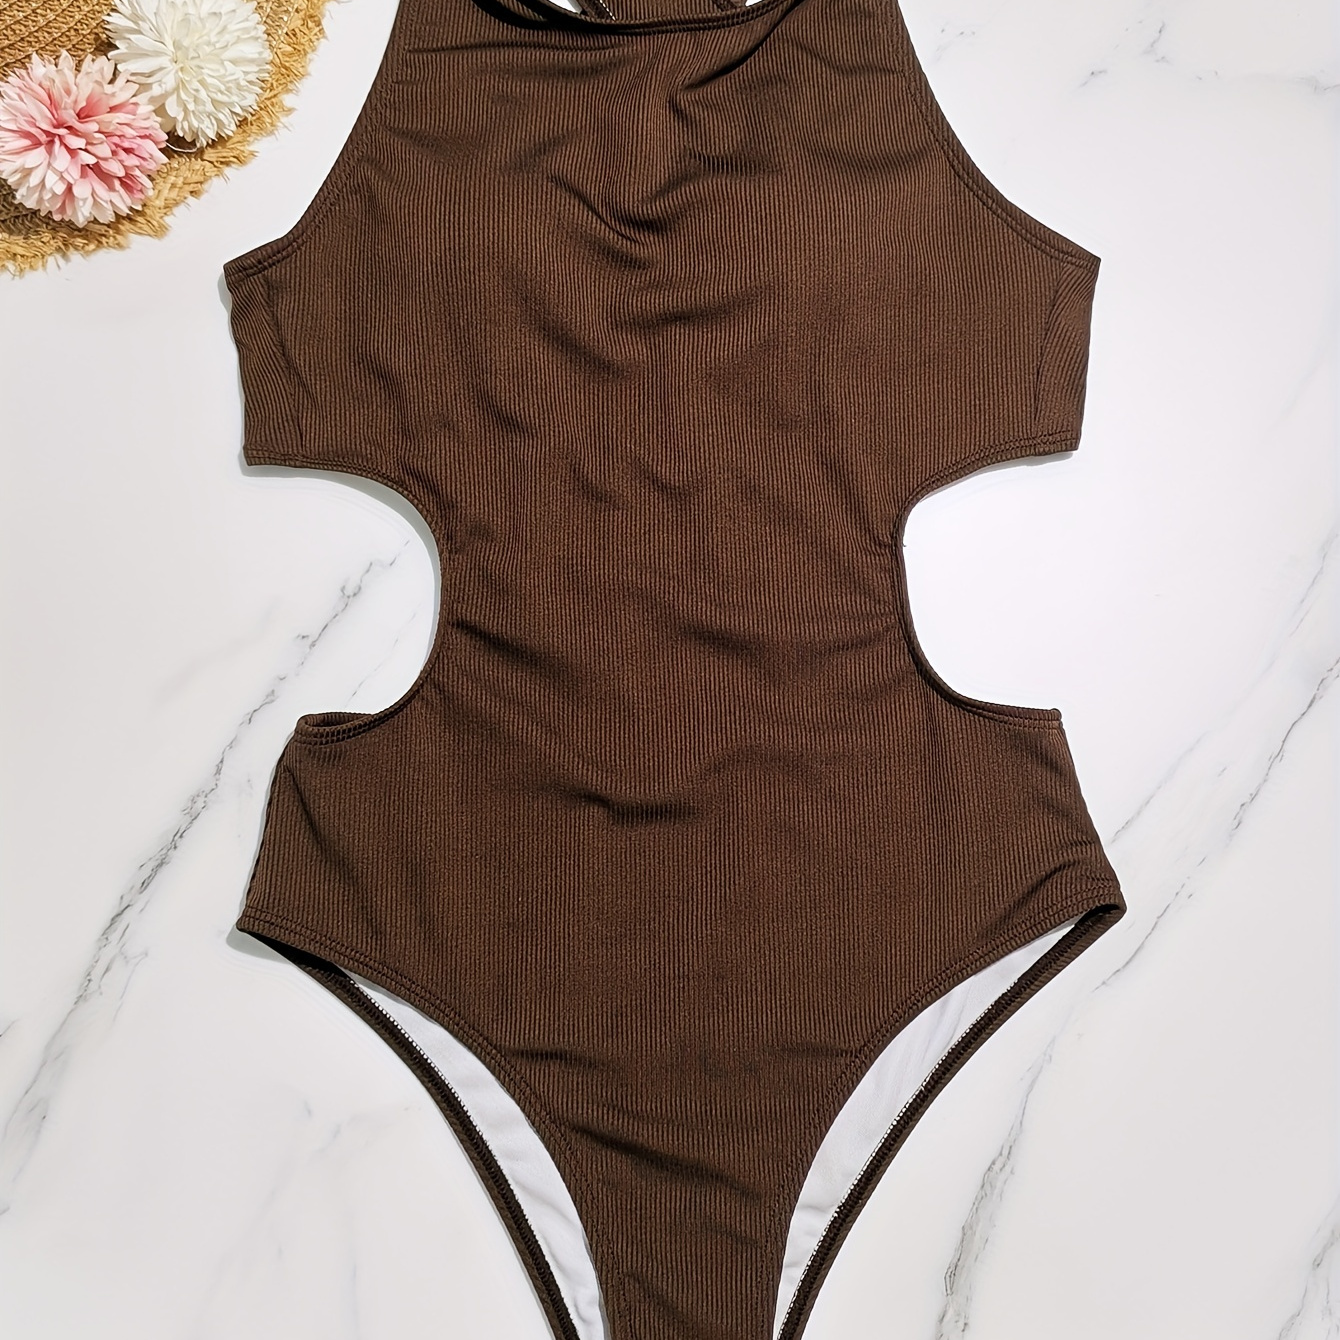 

Criss Cross Back Brown 1 Piece Swimsuit, High Round Neck High Cut Backless Bathing Suit, Women's Swimwear & Clothing